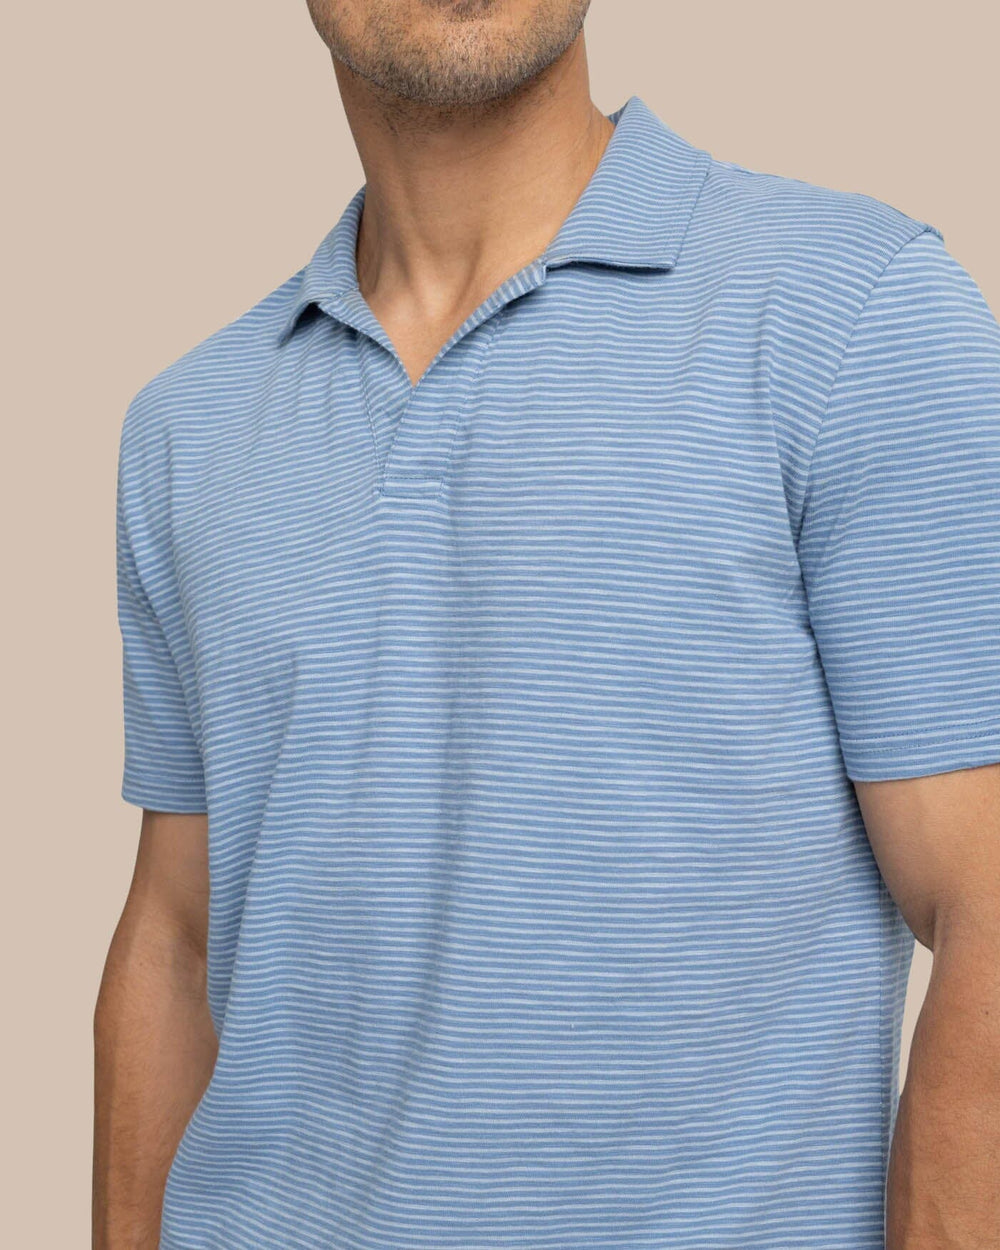 The detail view of the Southern Tide Sun Farer Summertree Stripe Polo by Southern Tide - Coronet Blue